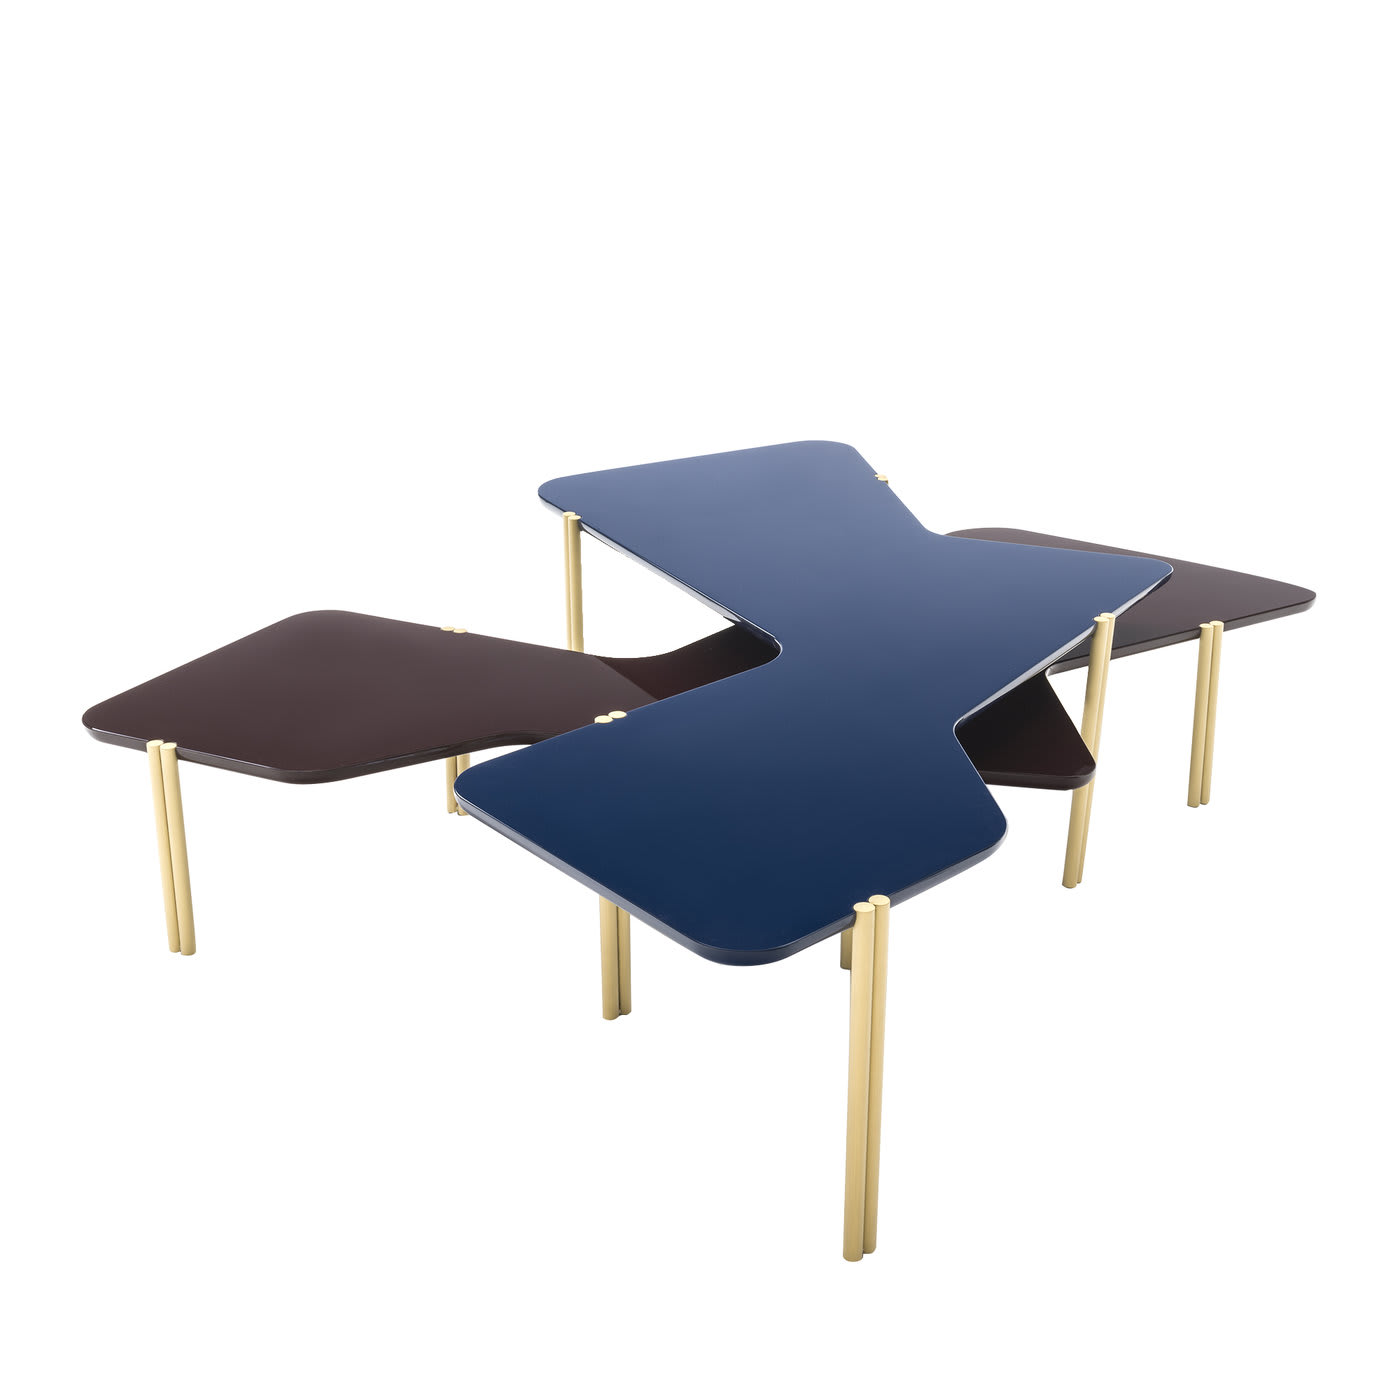 Jean Stackable Tables - Durame